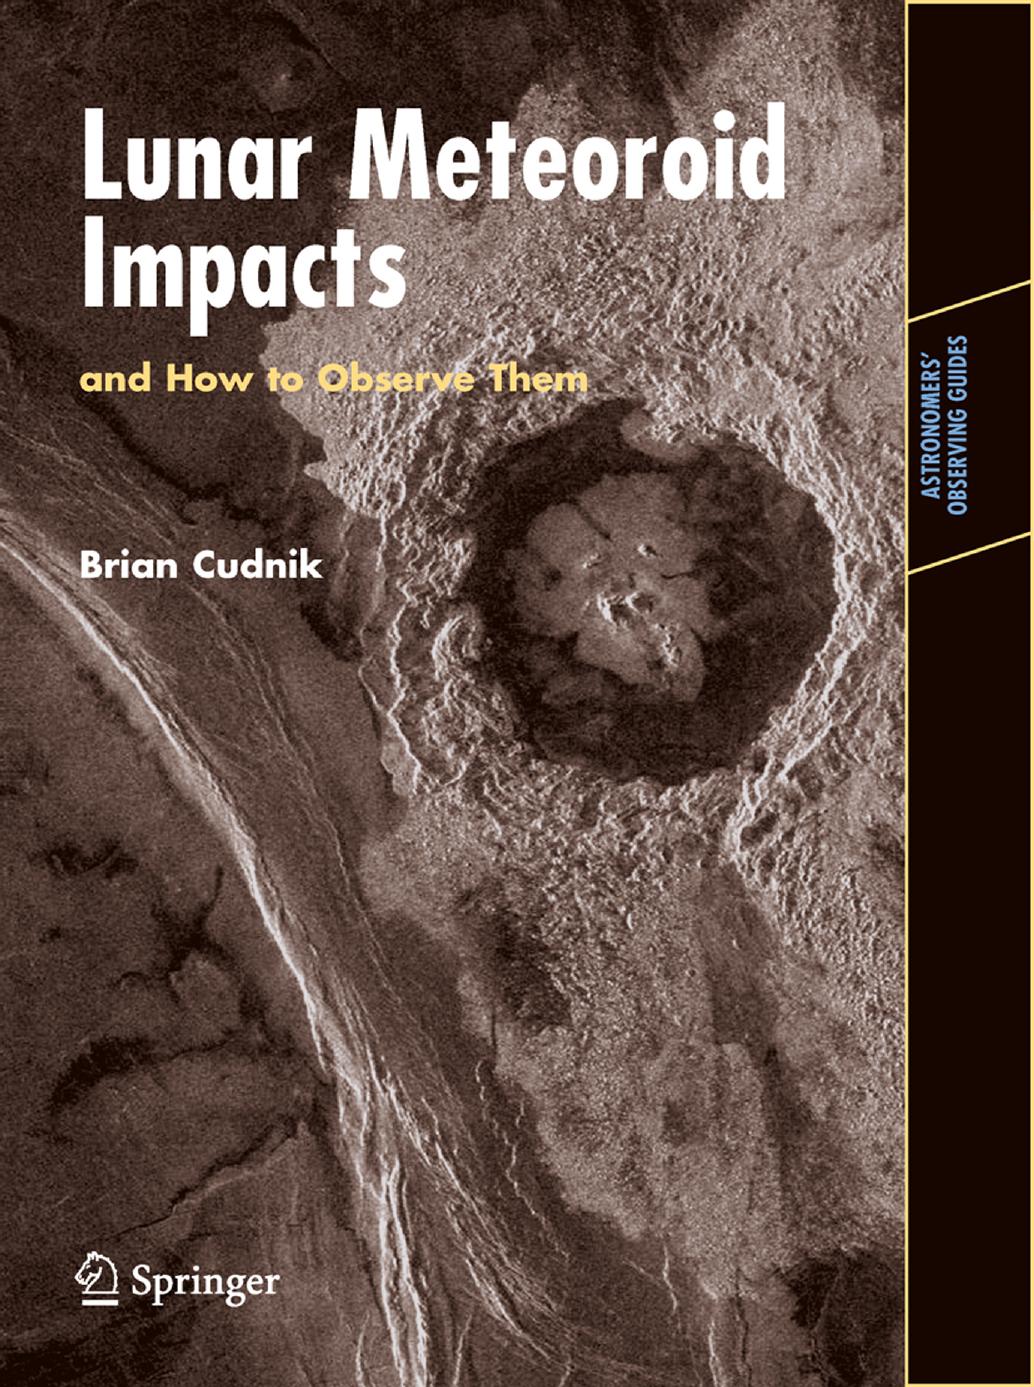 Lunar Meteoroid Impacts and How to Observe Them (Astronomers' Observing Guides) by Brian Cudnik